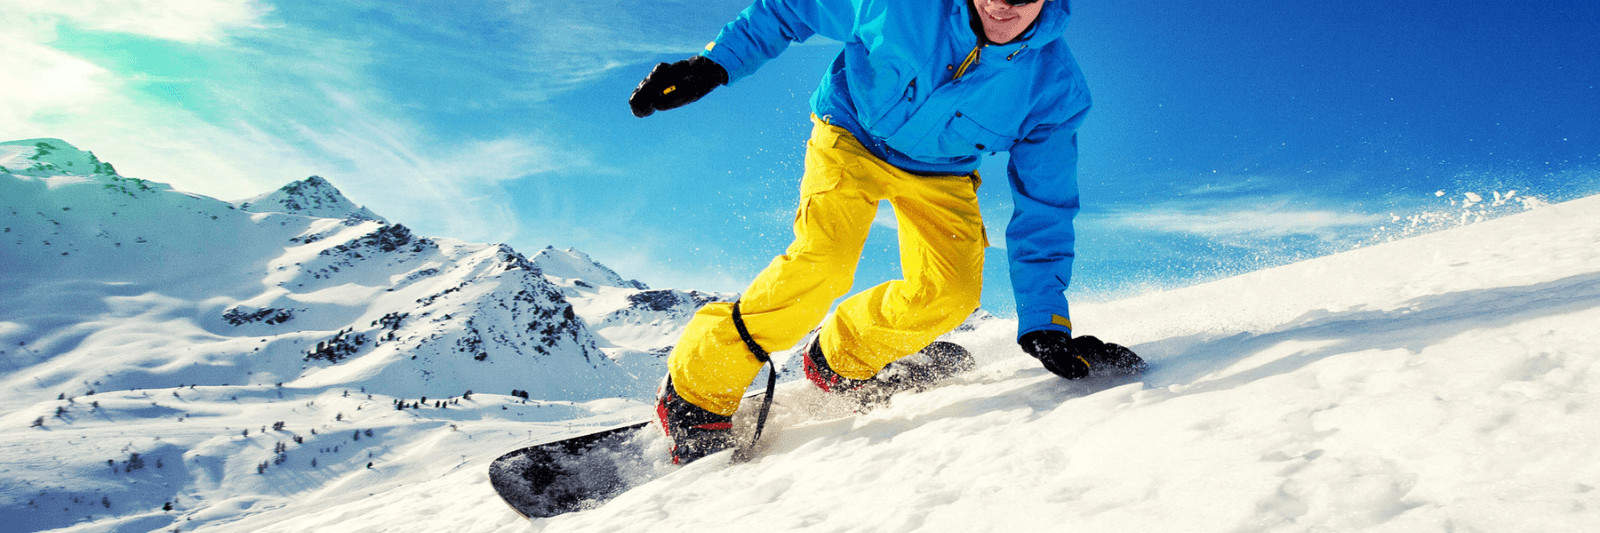 gift ideas for snowboarders